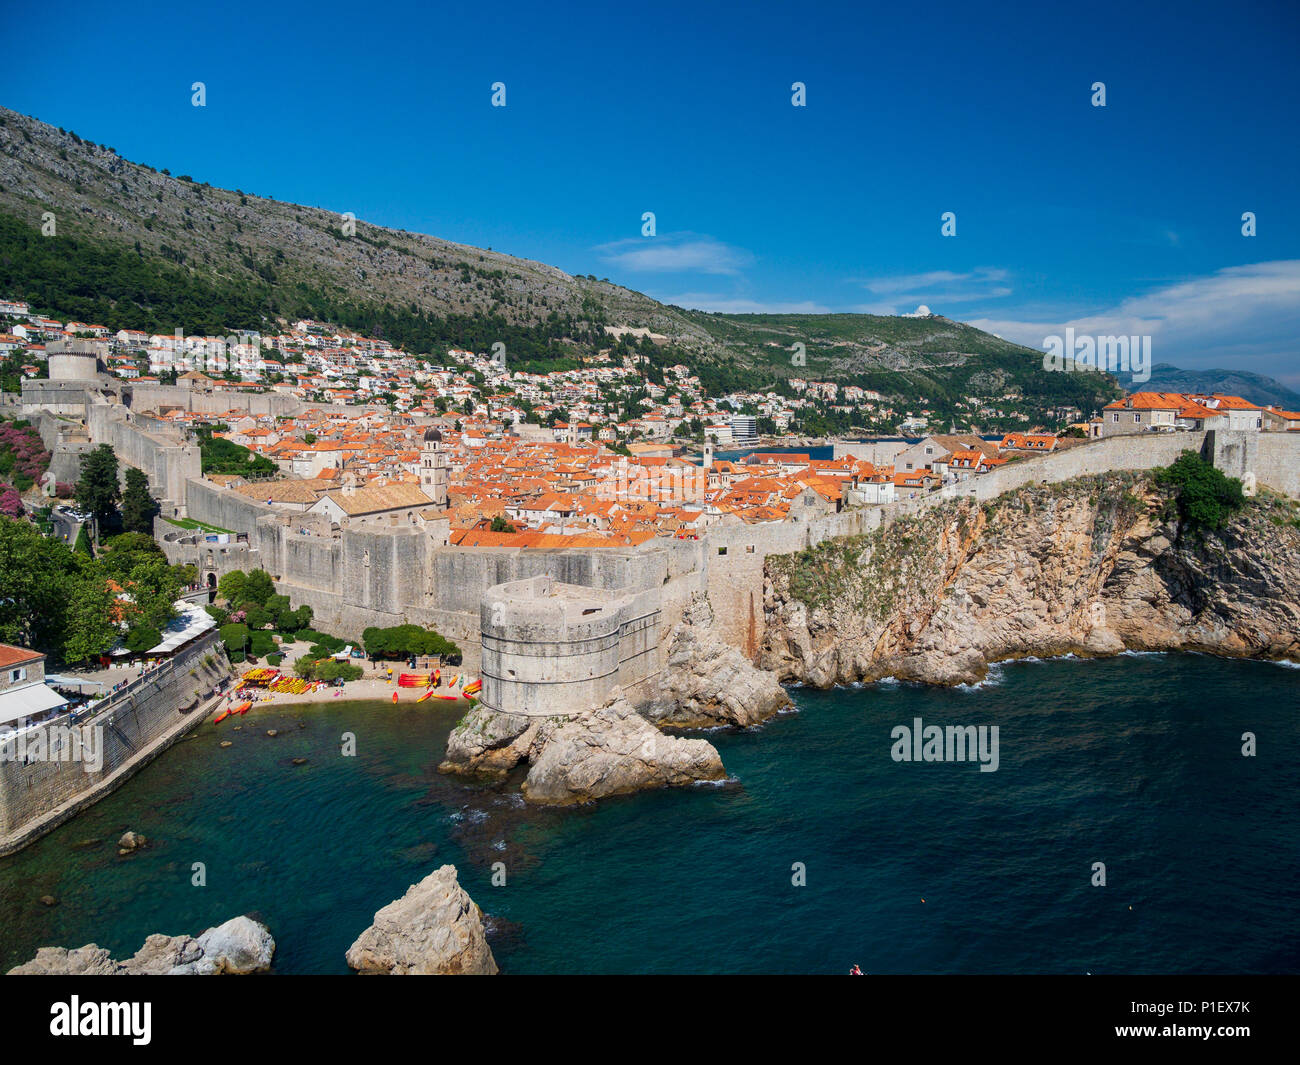 View of Dubrovnik from the walls Stock Photo